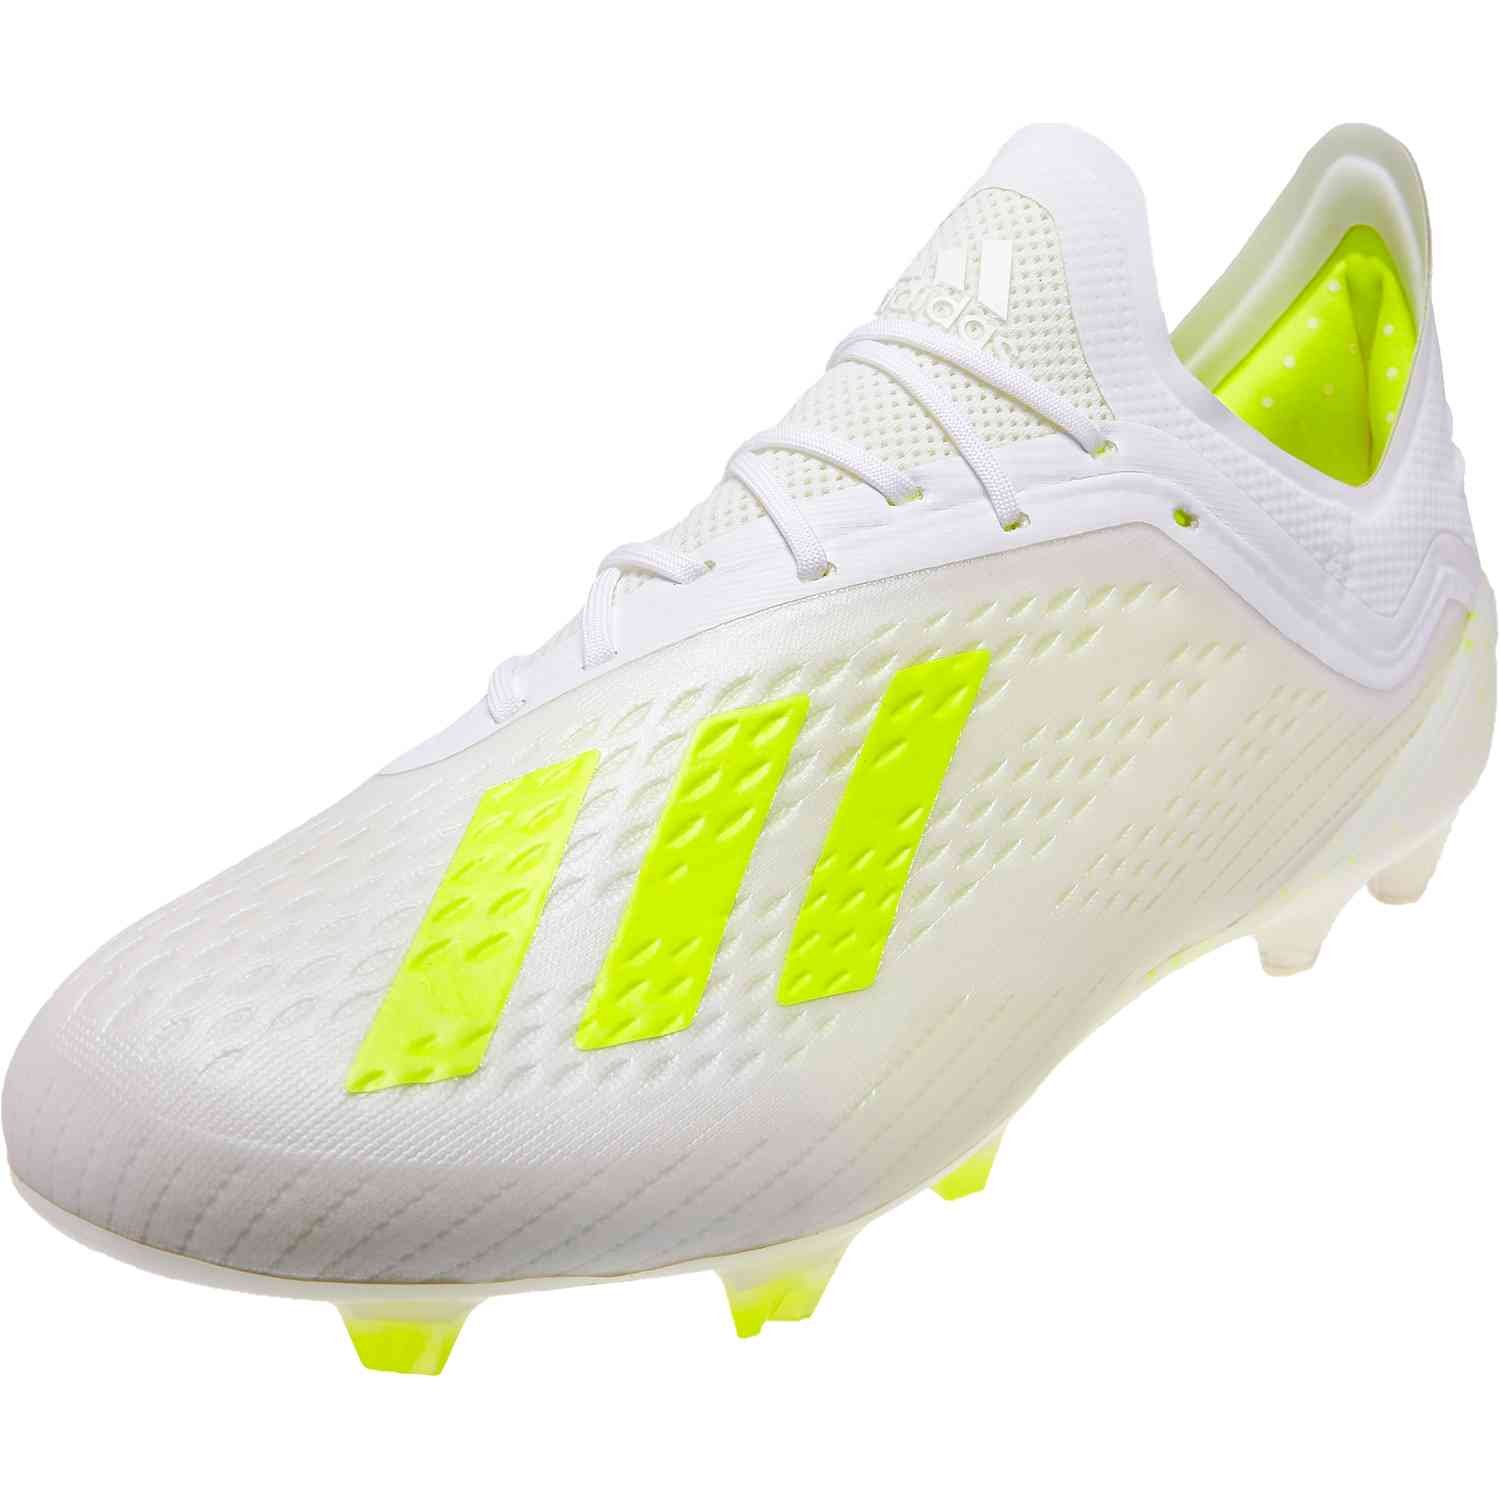 adidas soccer cleats 18.1